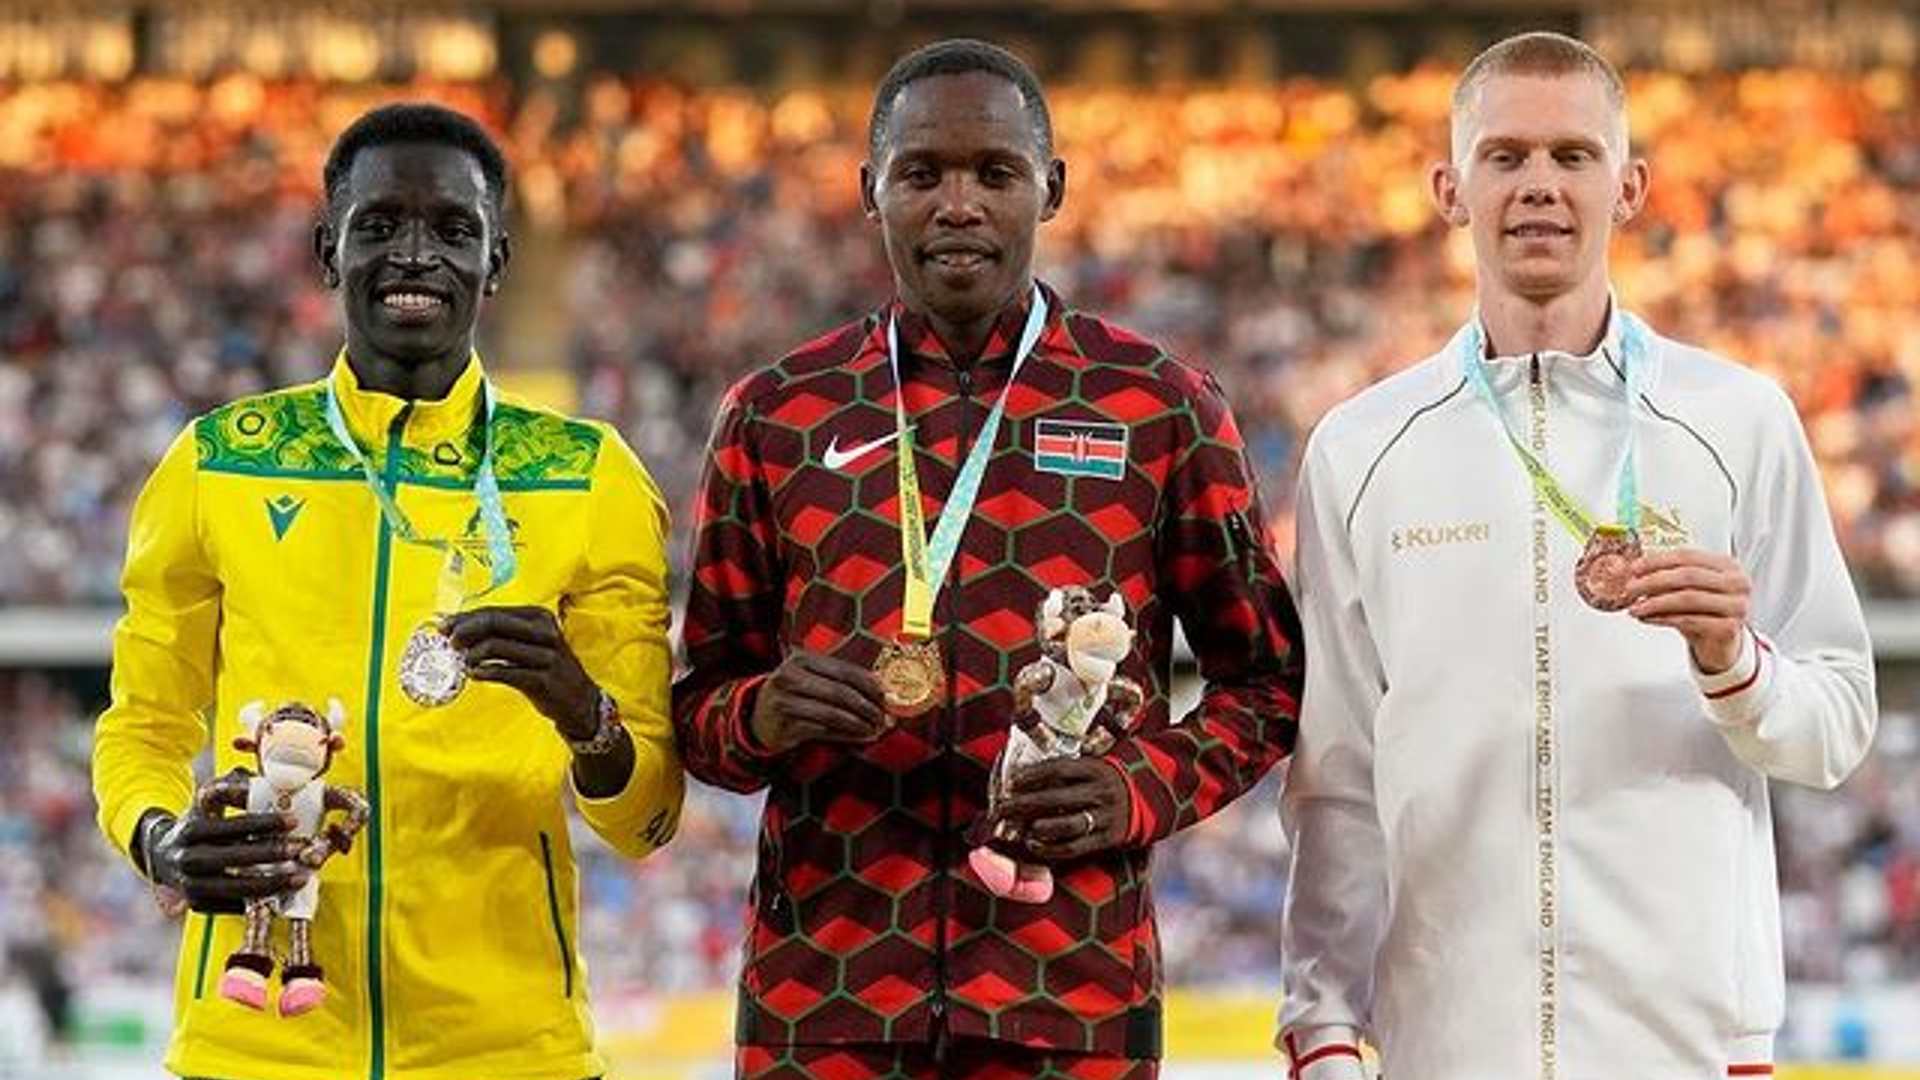 Peter Bol and the other medalists sharing the podium at the Commonwealth Games 2022 (Image - Instagram/ @pbol800)